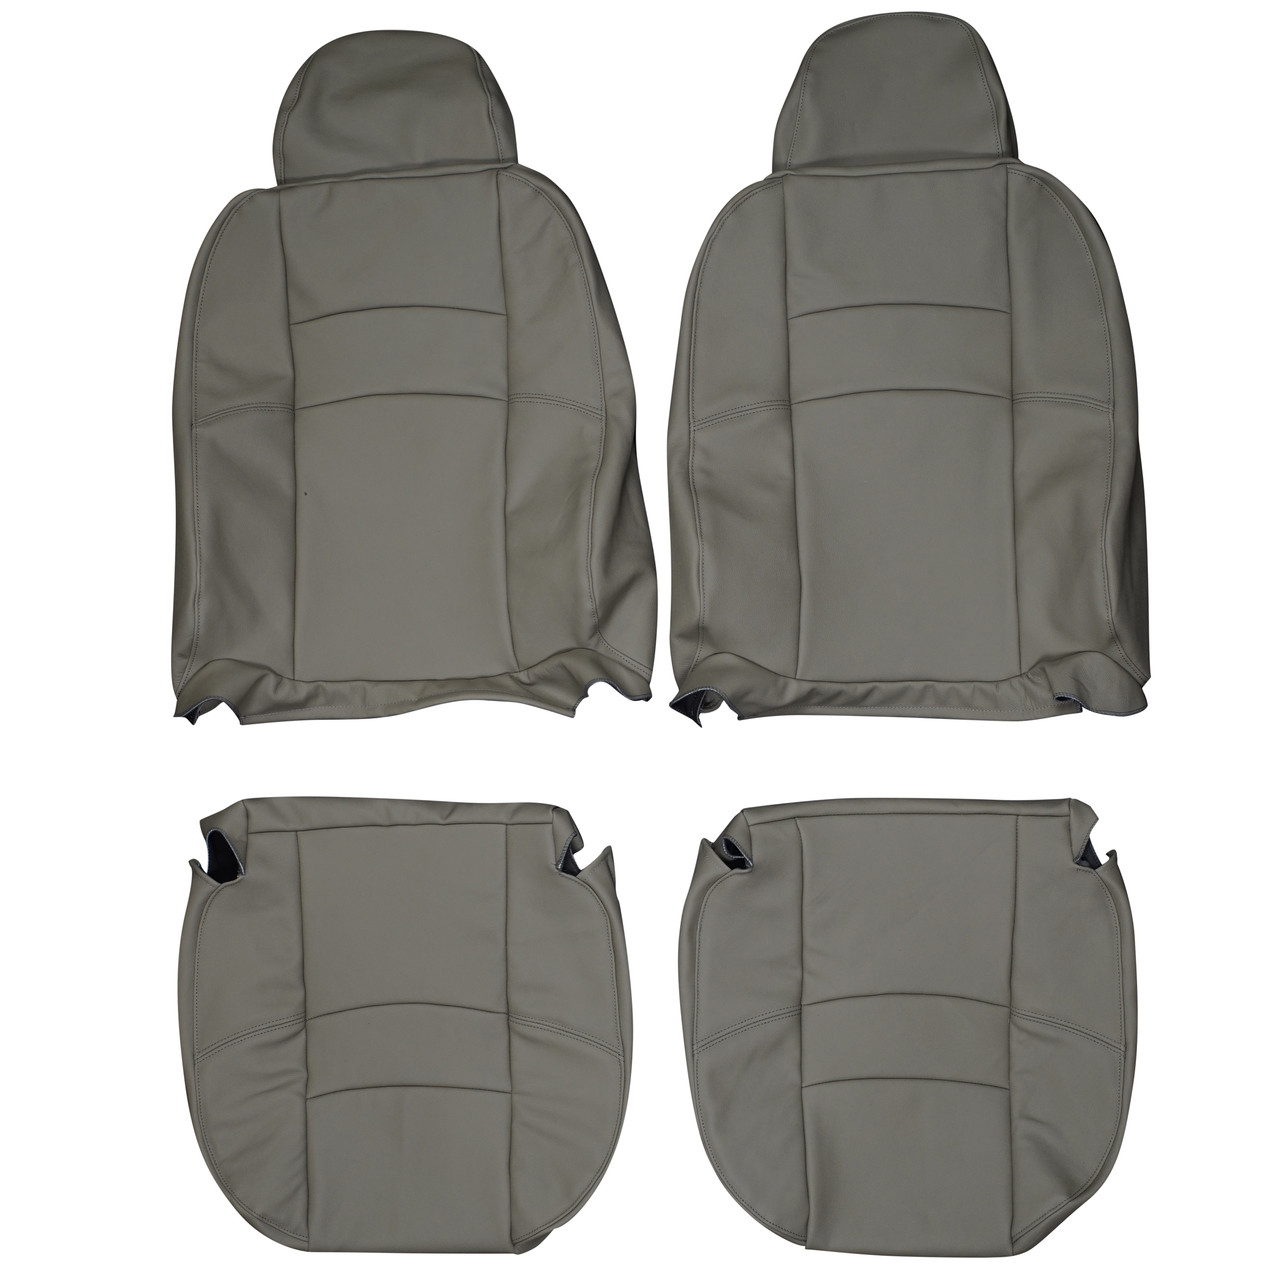 1996-2000 Volvo S70 Custom Real Leather Seat Covers (Front) - Lseat.com